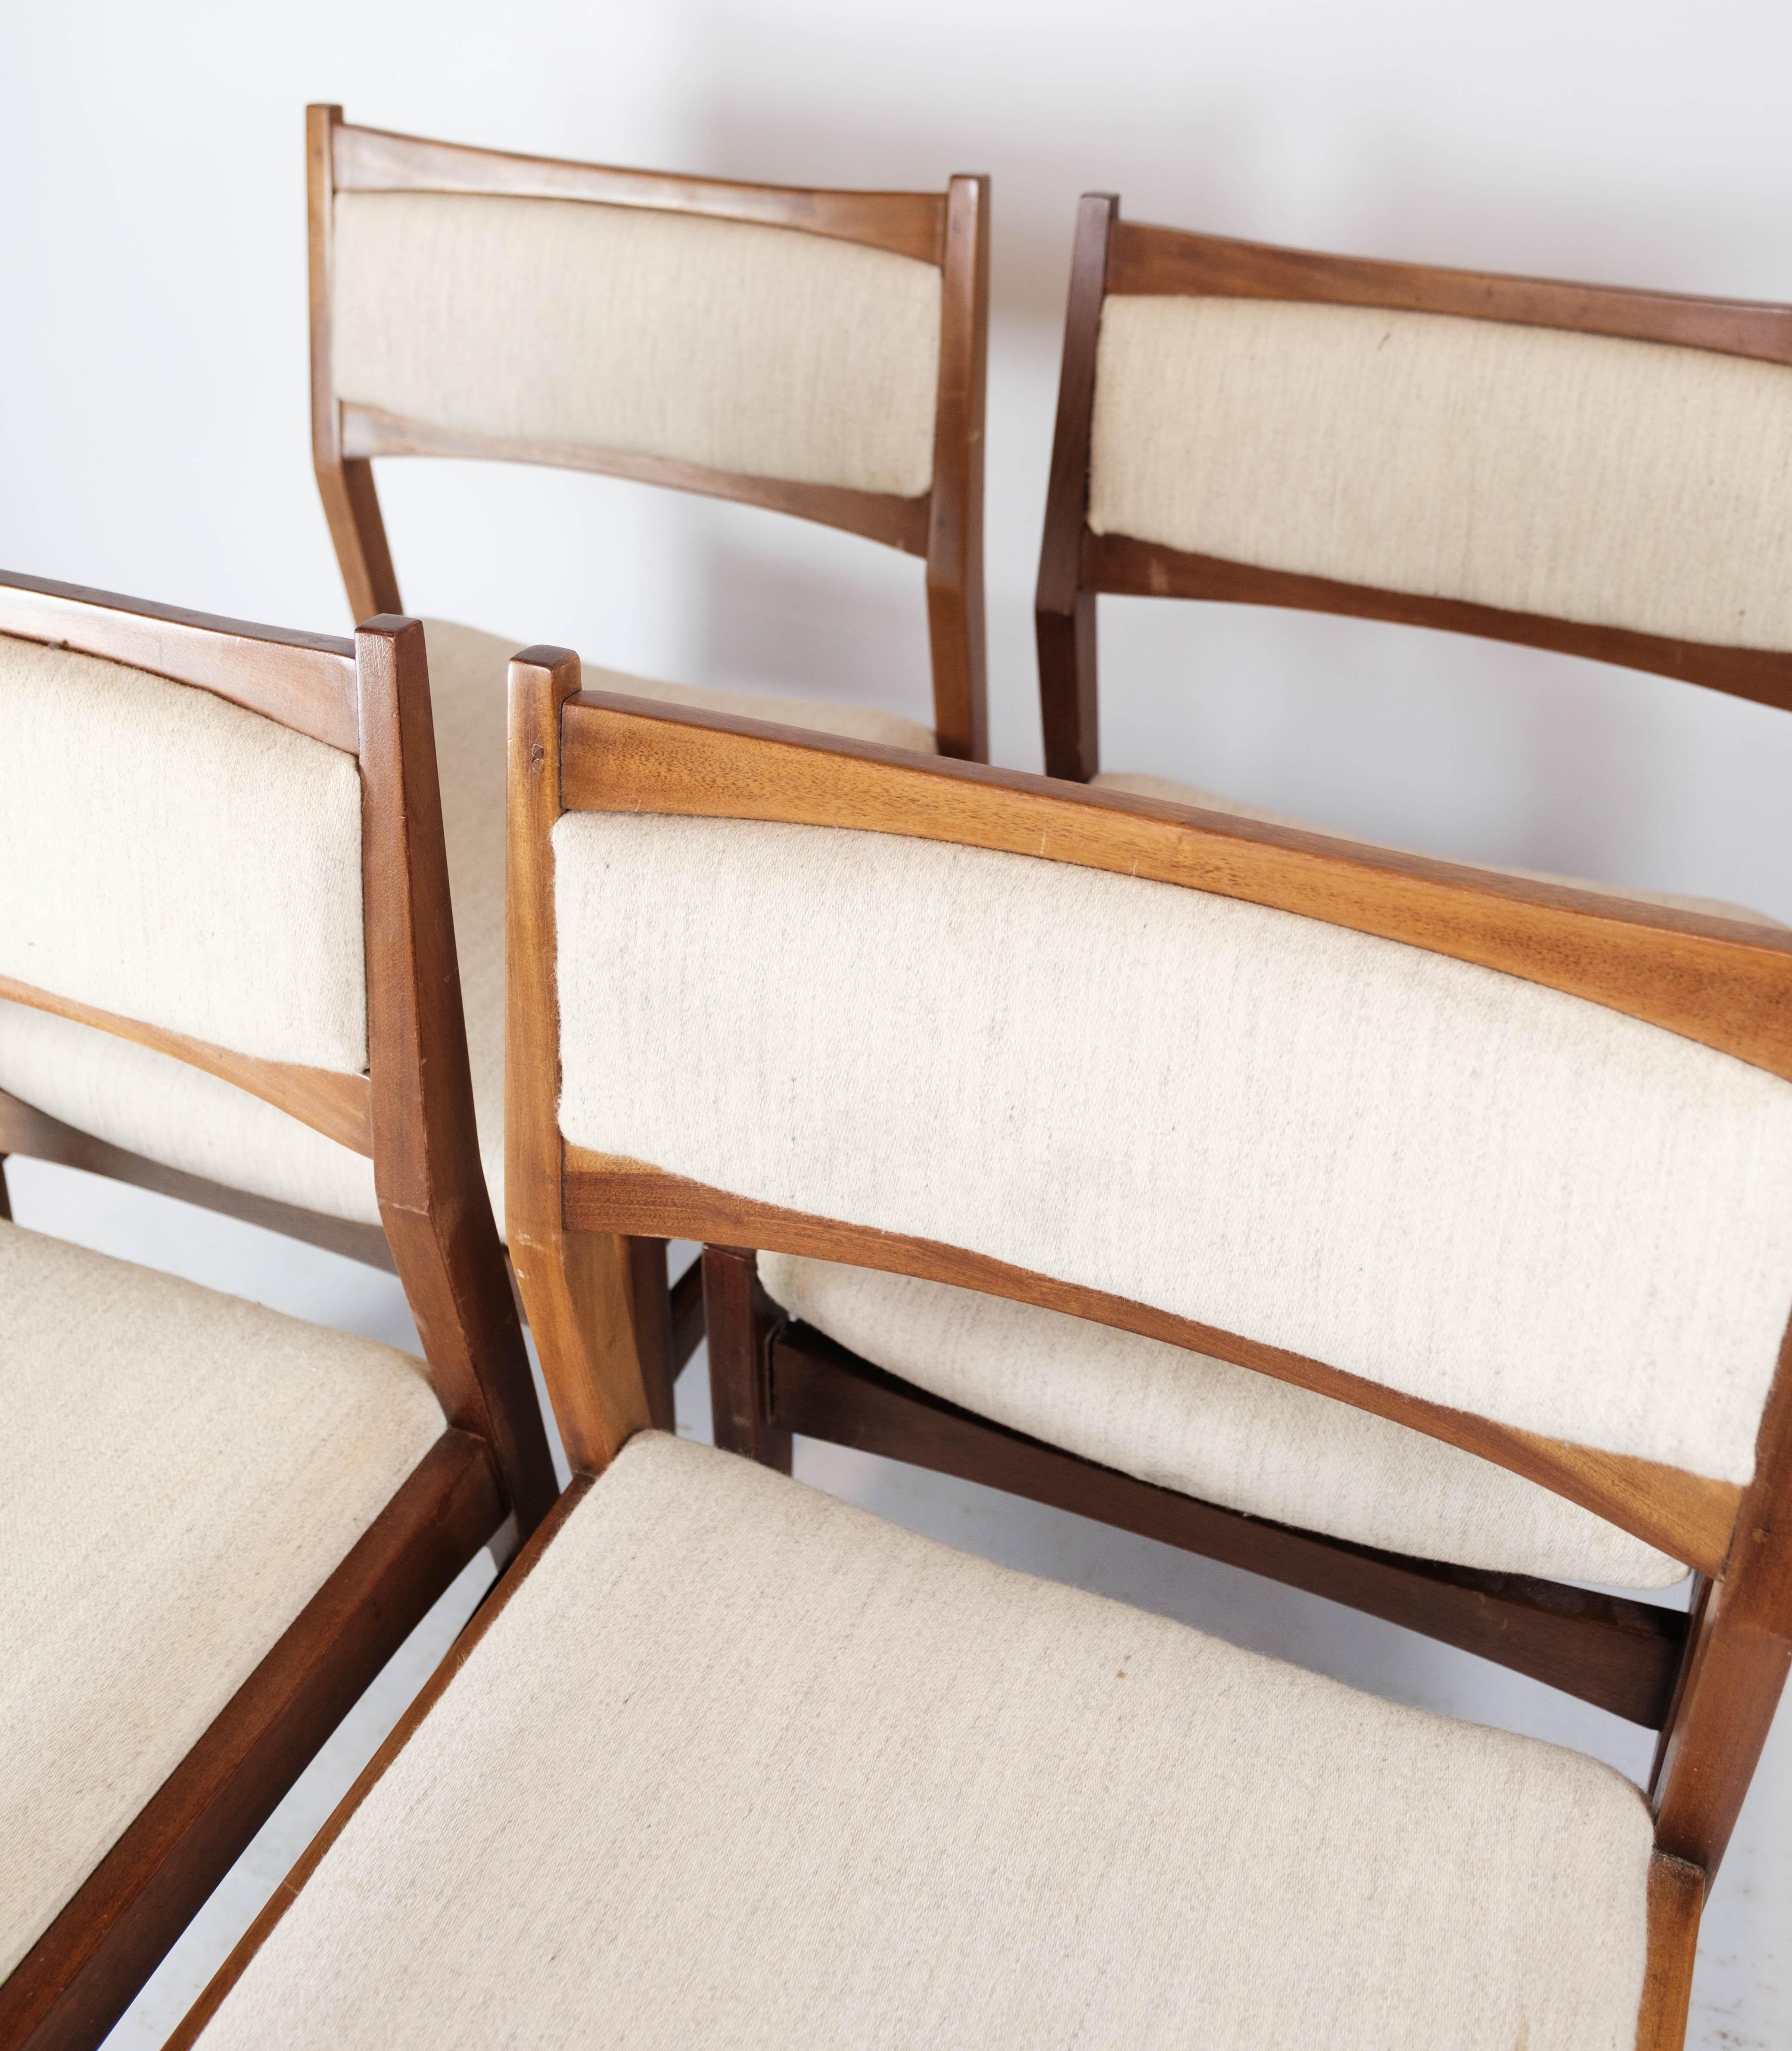 Set of four dining room chairs in teak and upholstered with light fabric, of Danish design from the 1960s. The chairs are in great vintage condition.